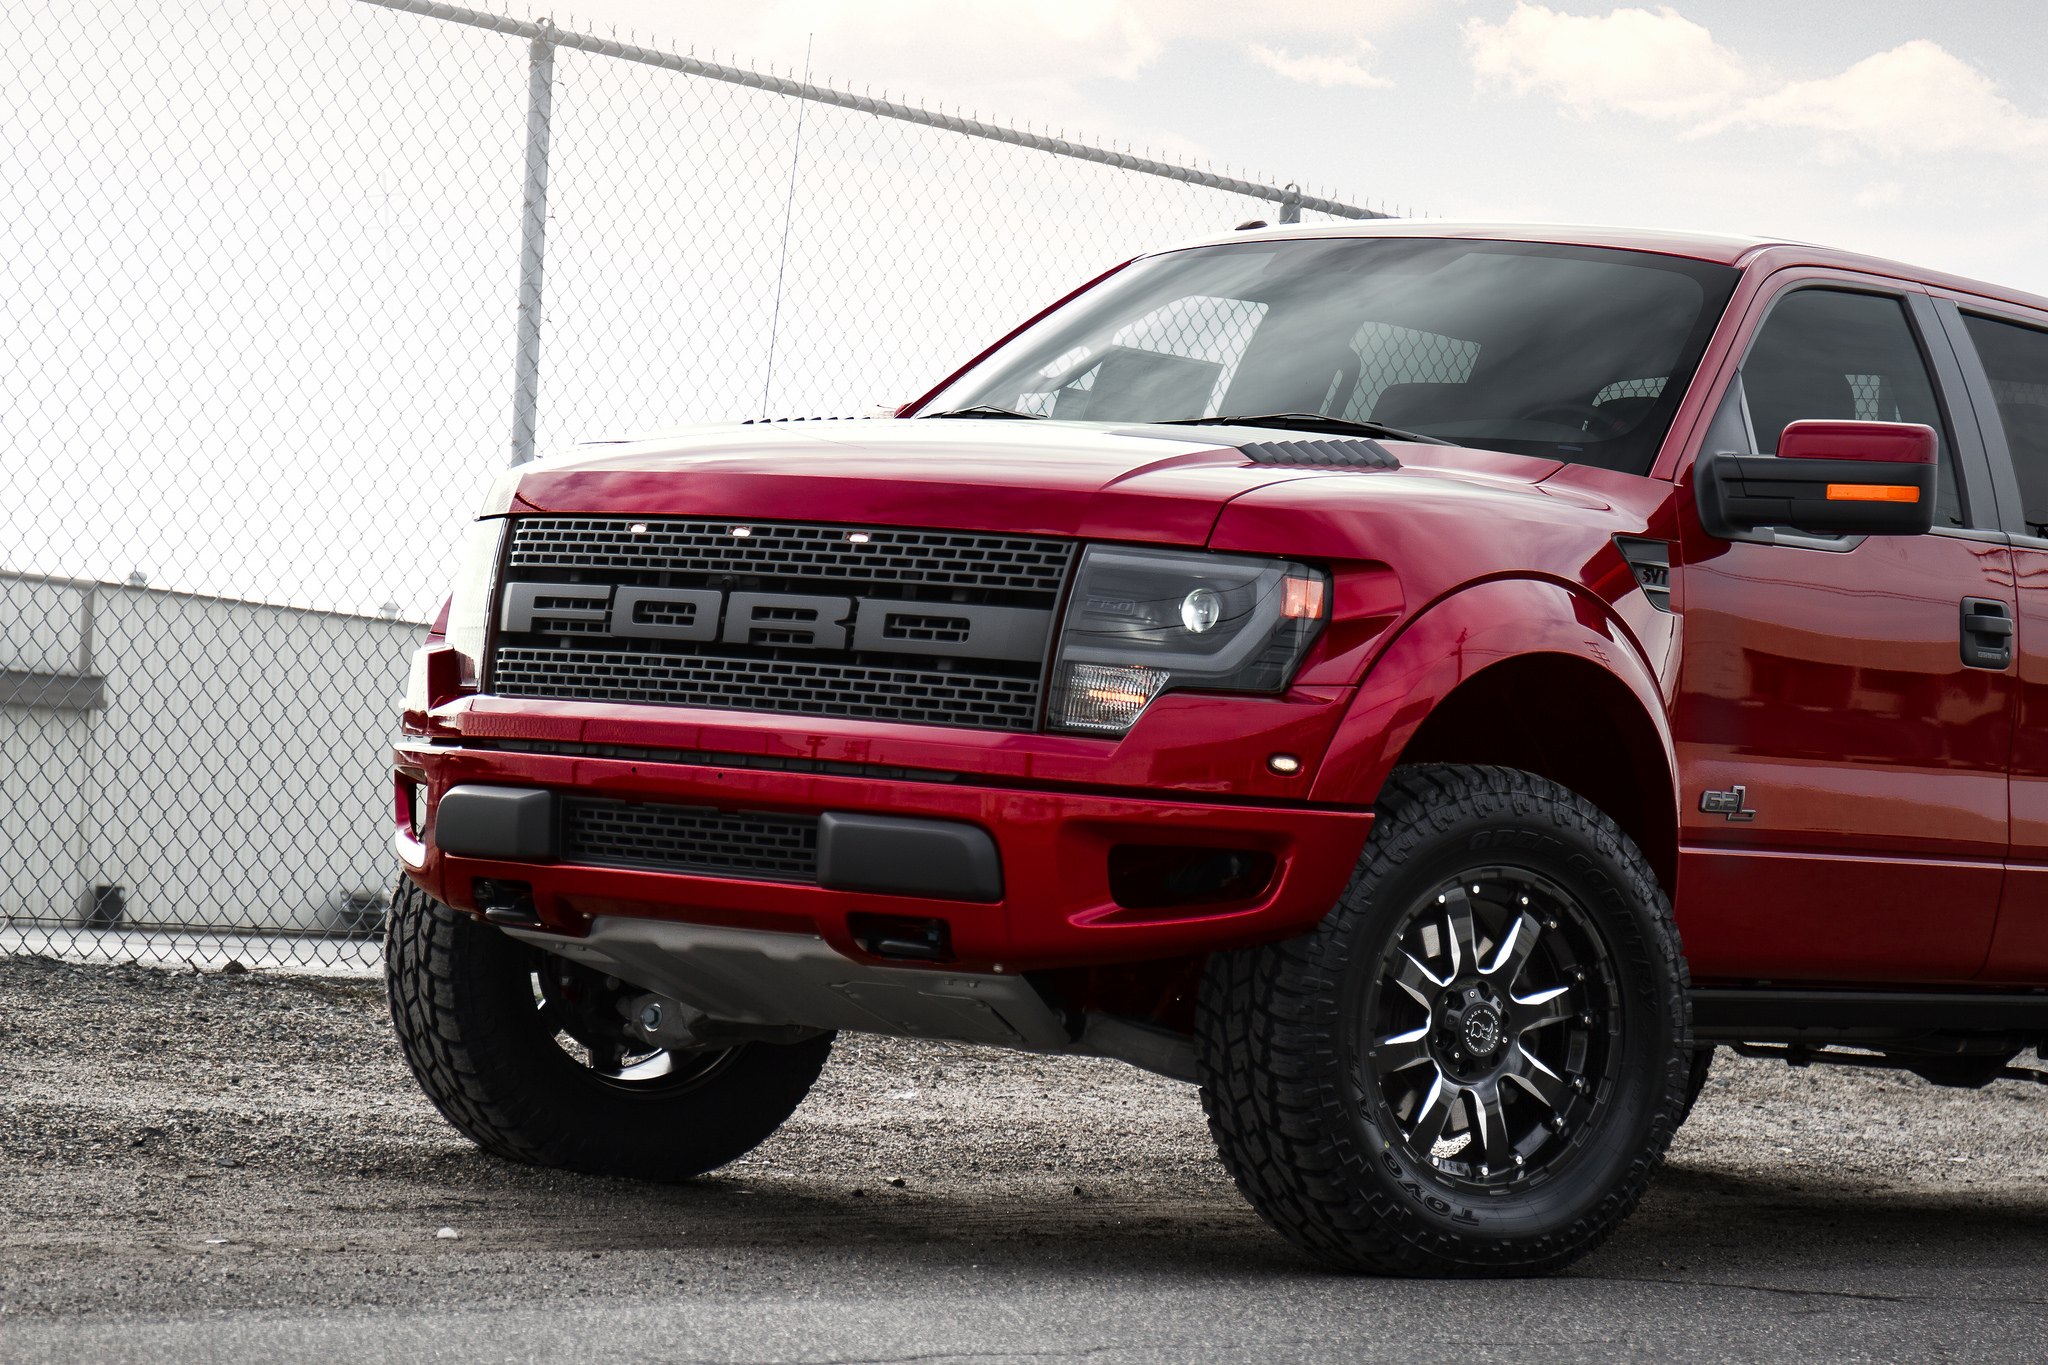 Ford Raptor With Custom Painted Bumper - Photo by Black Rhino